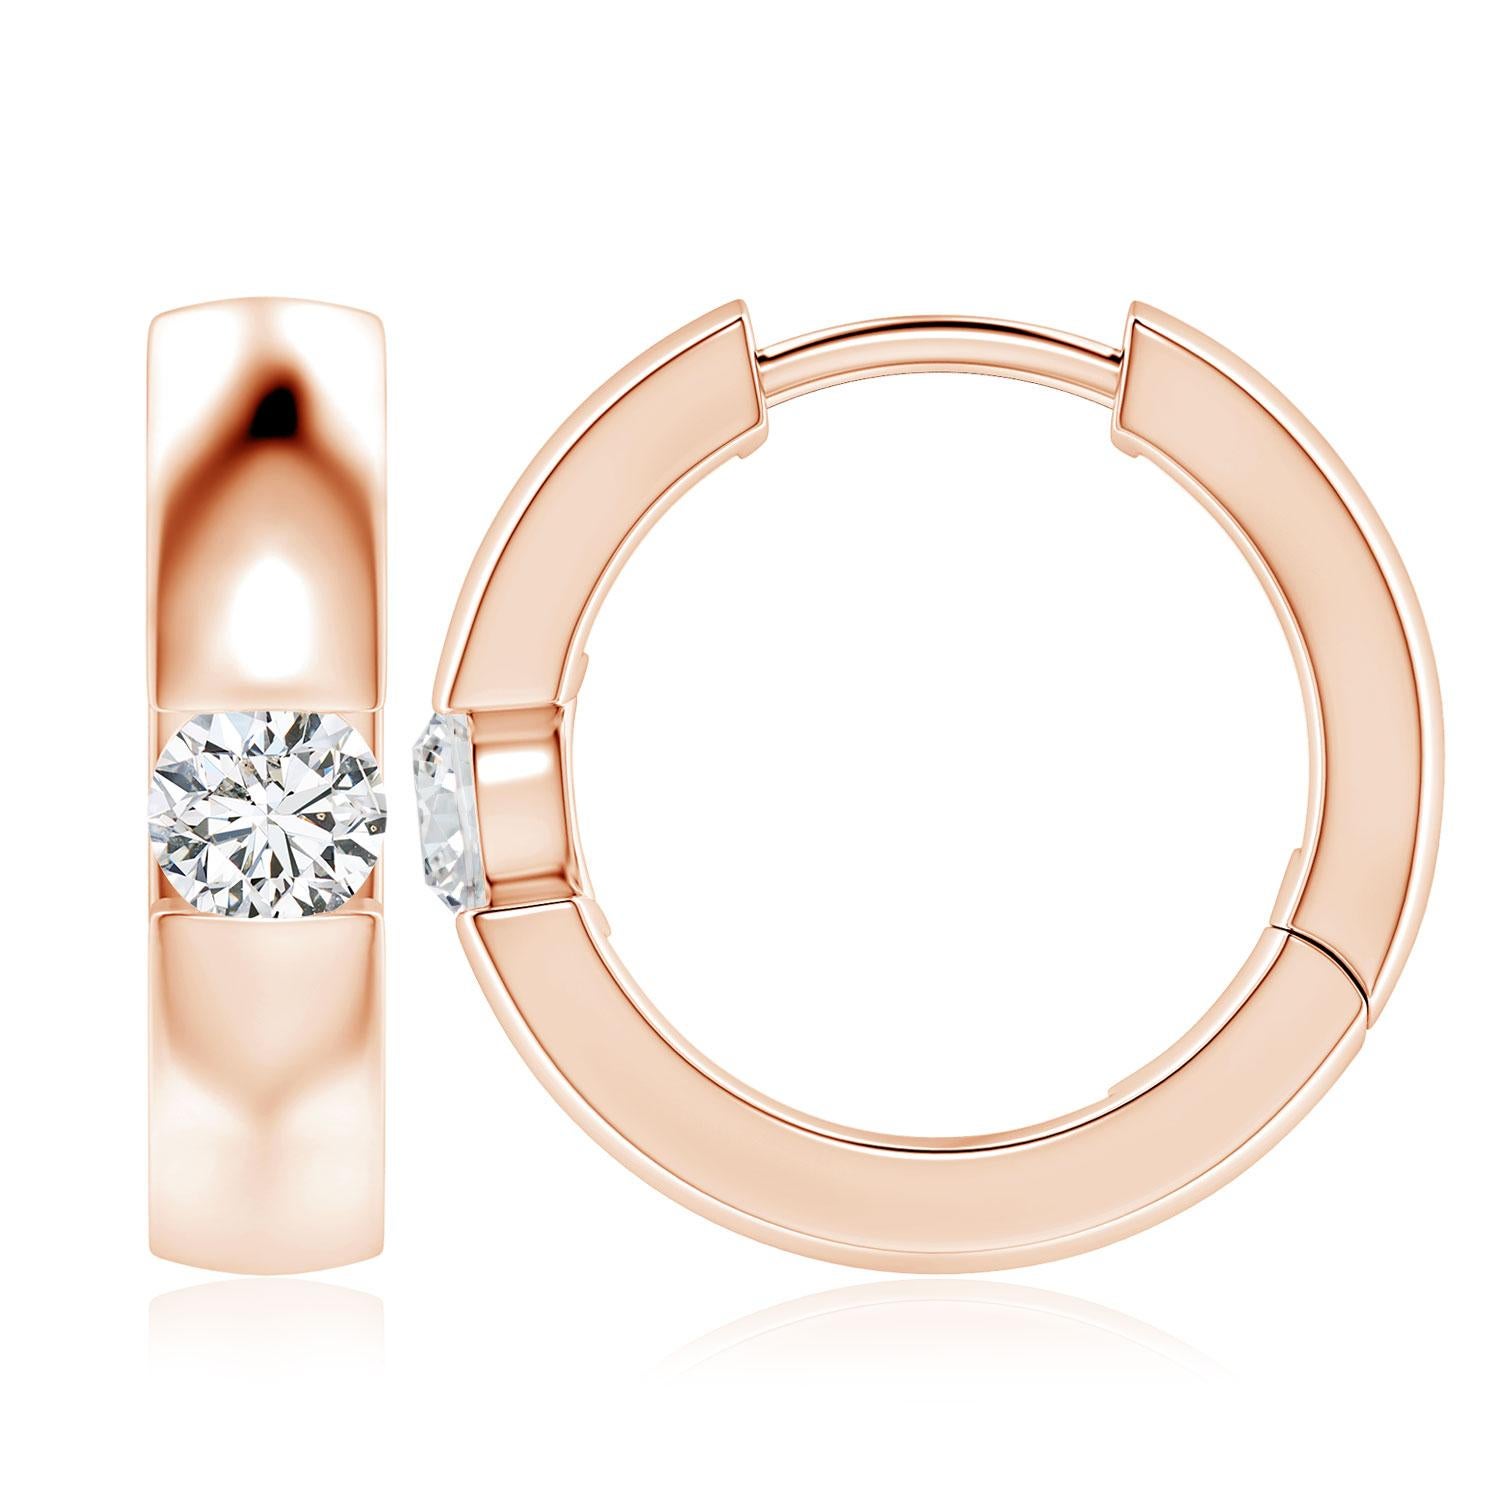 Round Cut ANGARA Natural Round 0.35ct Diamond Hoop Earrings in 14K Rose Gold (Color-H) For Sale